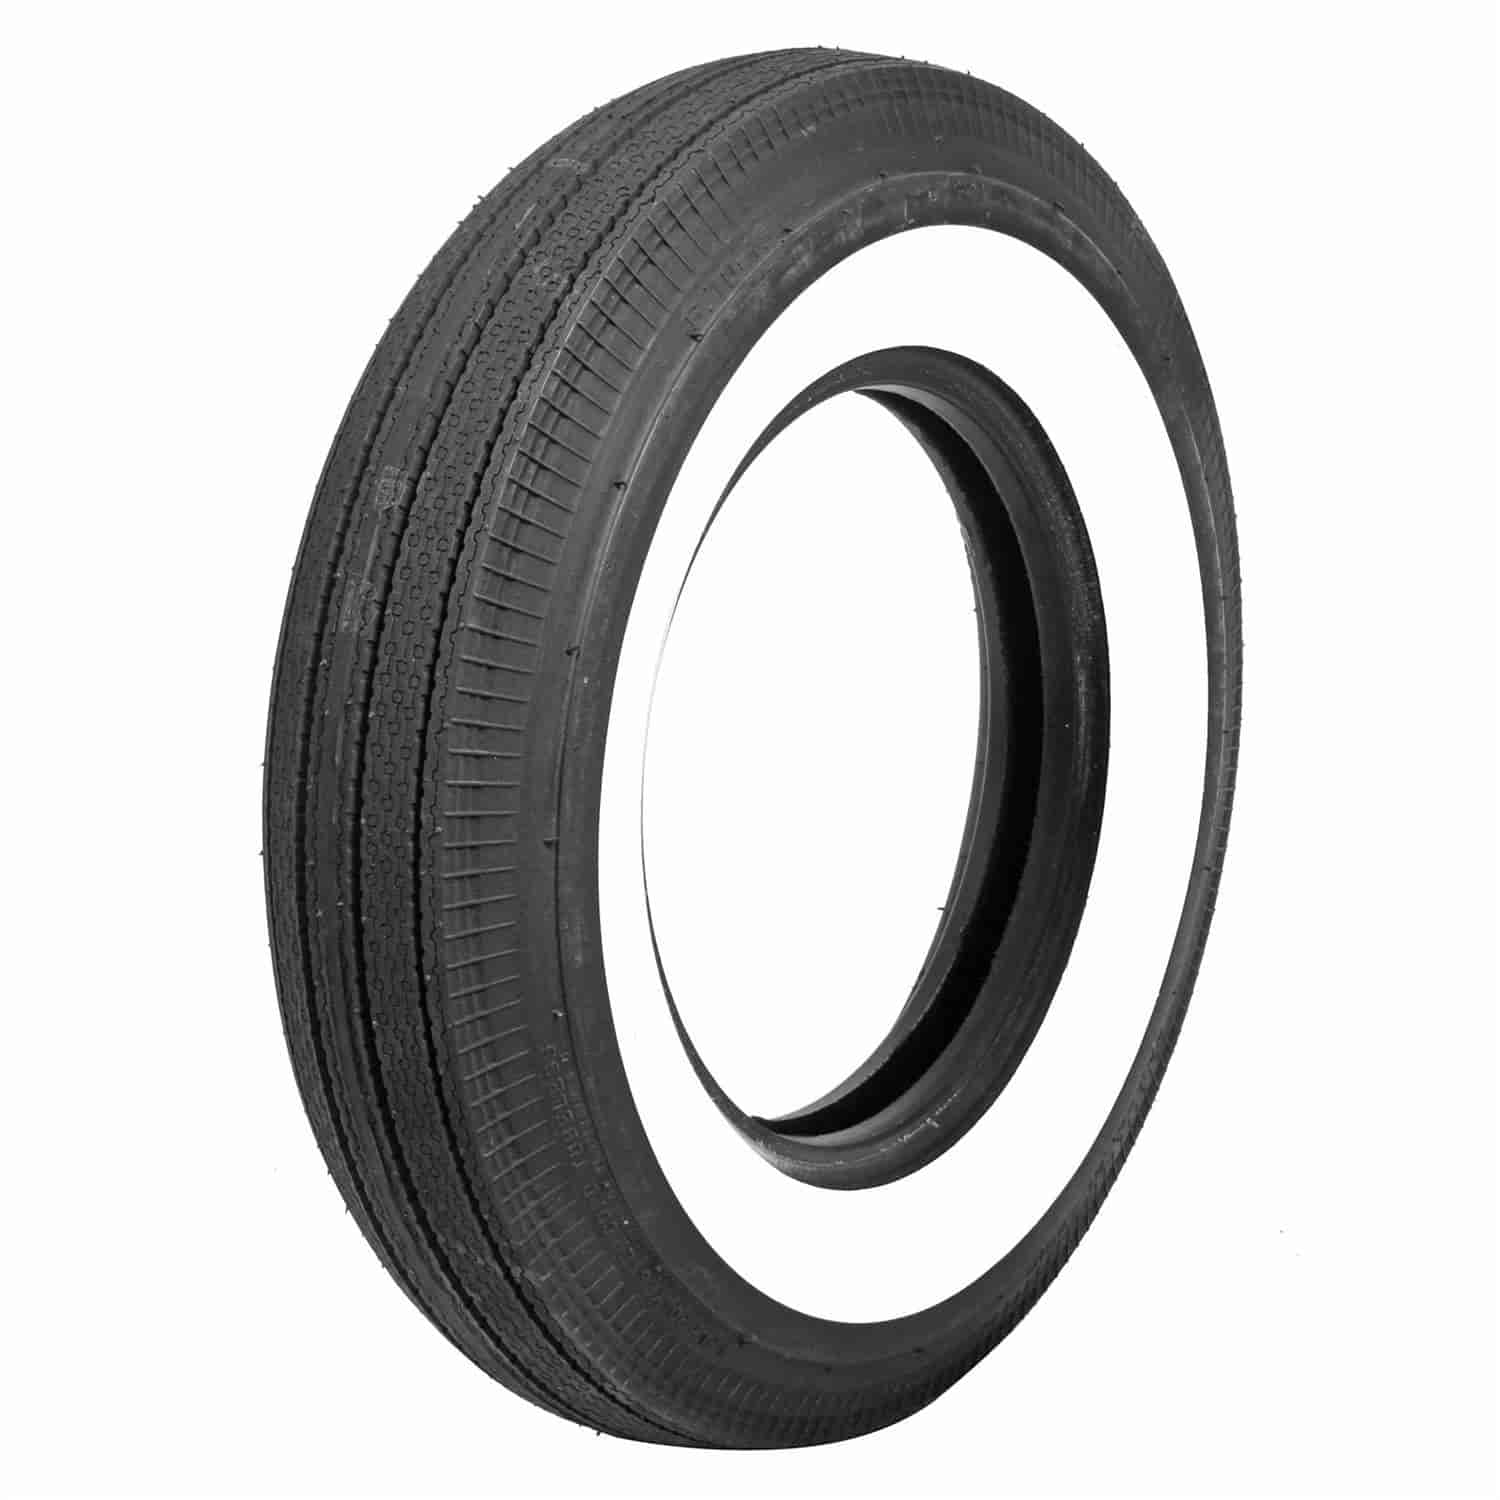 Coker Classic Wide Whitewall Bias Ply Tire 670-15 ( 4.5" x 27.25" - 15" )